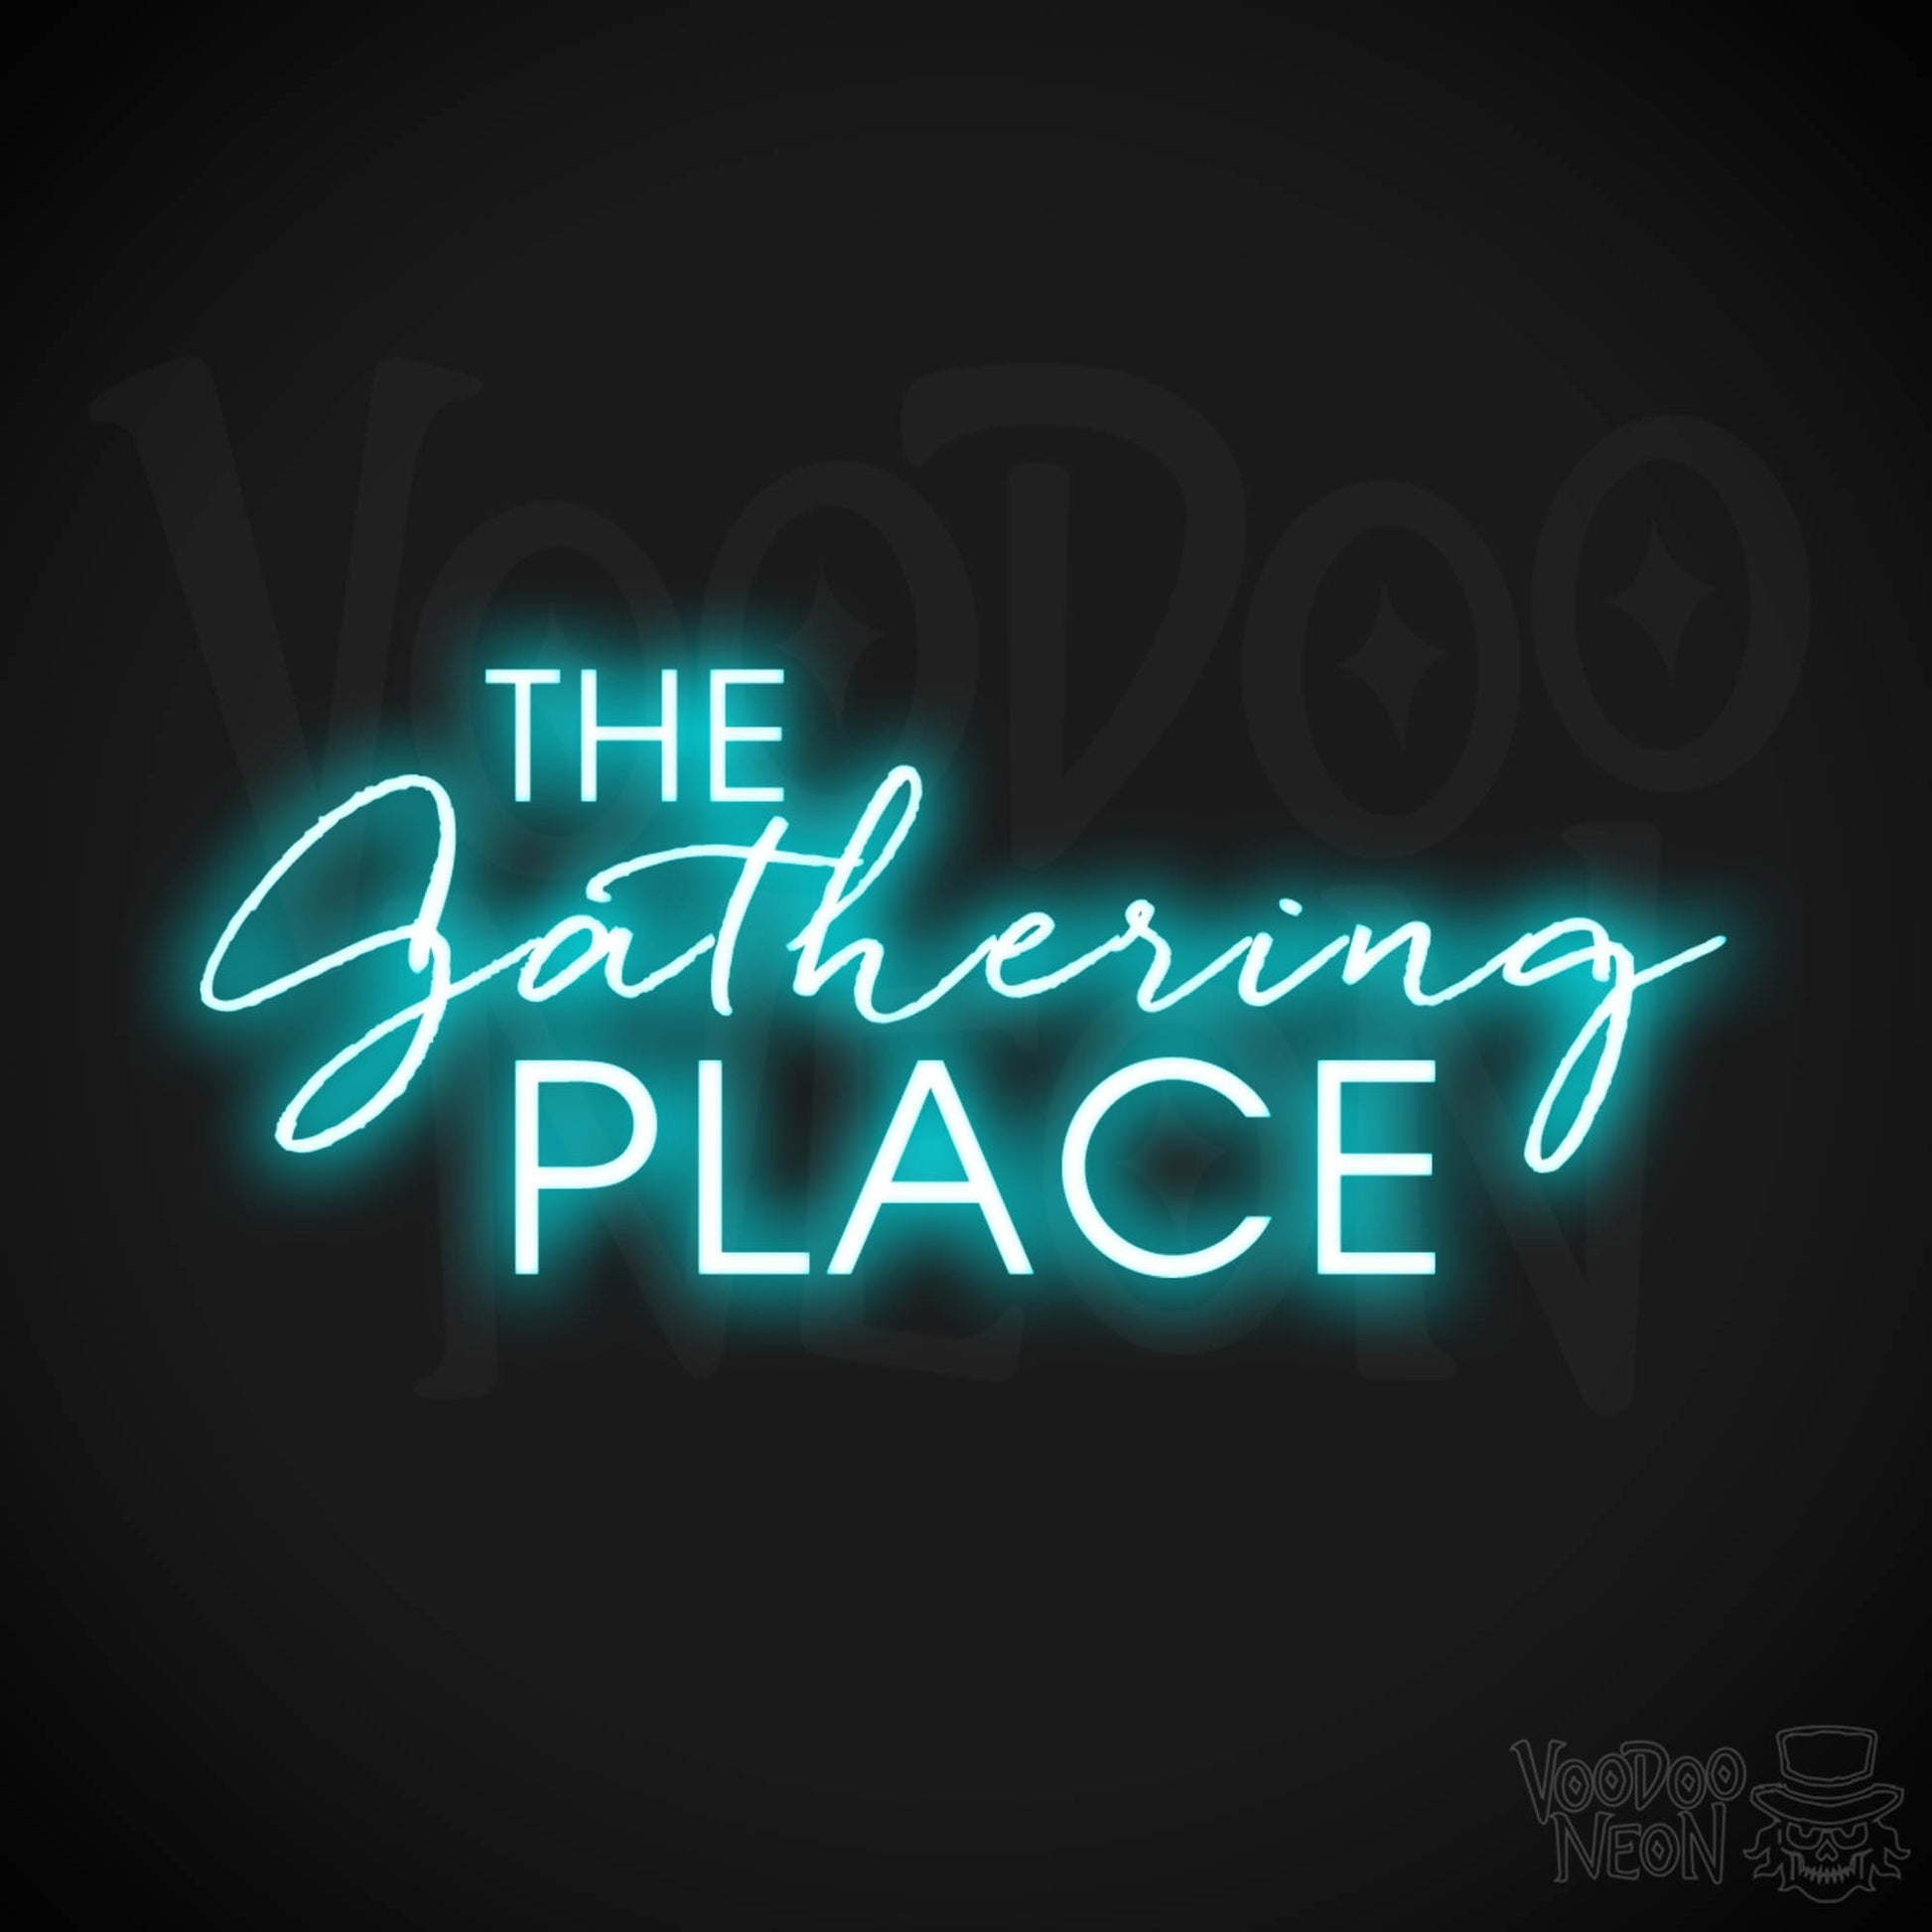 The Gathering Place Neon Sign - Neon The Gathering Place Sign - Wall Art - Color Ice Blue